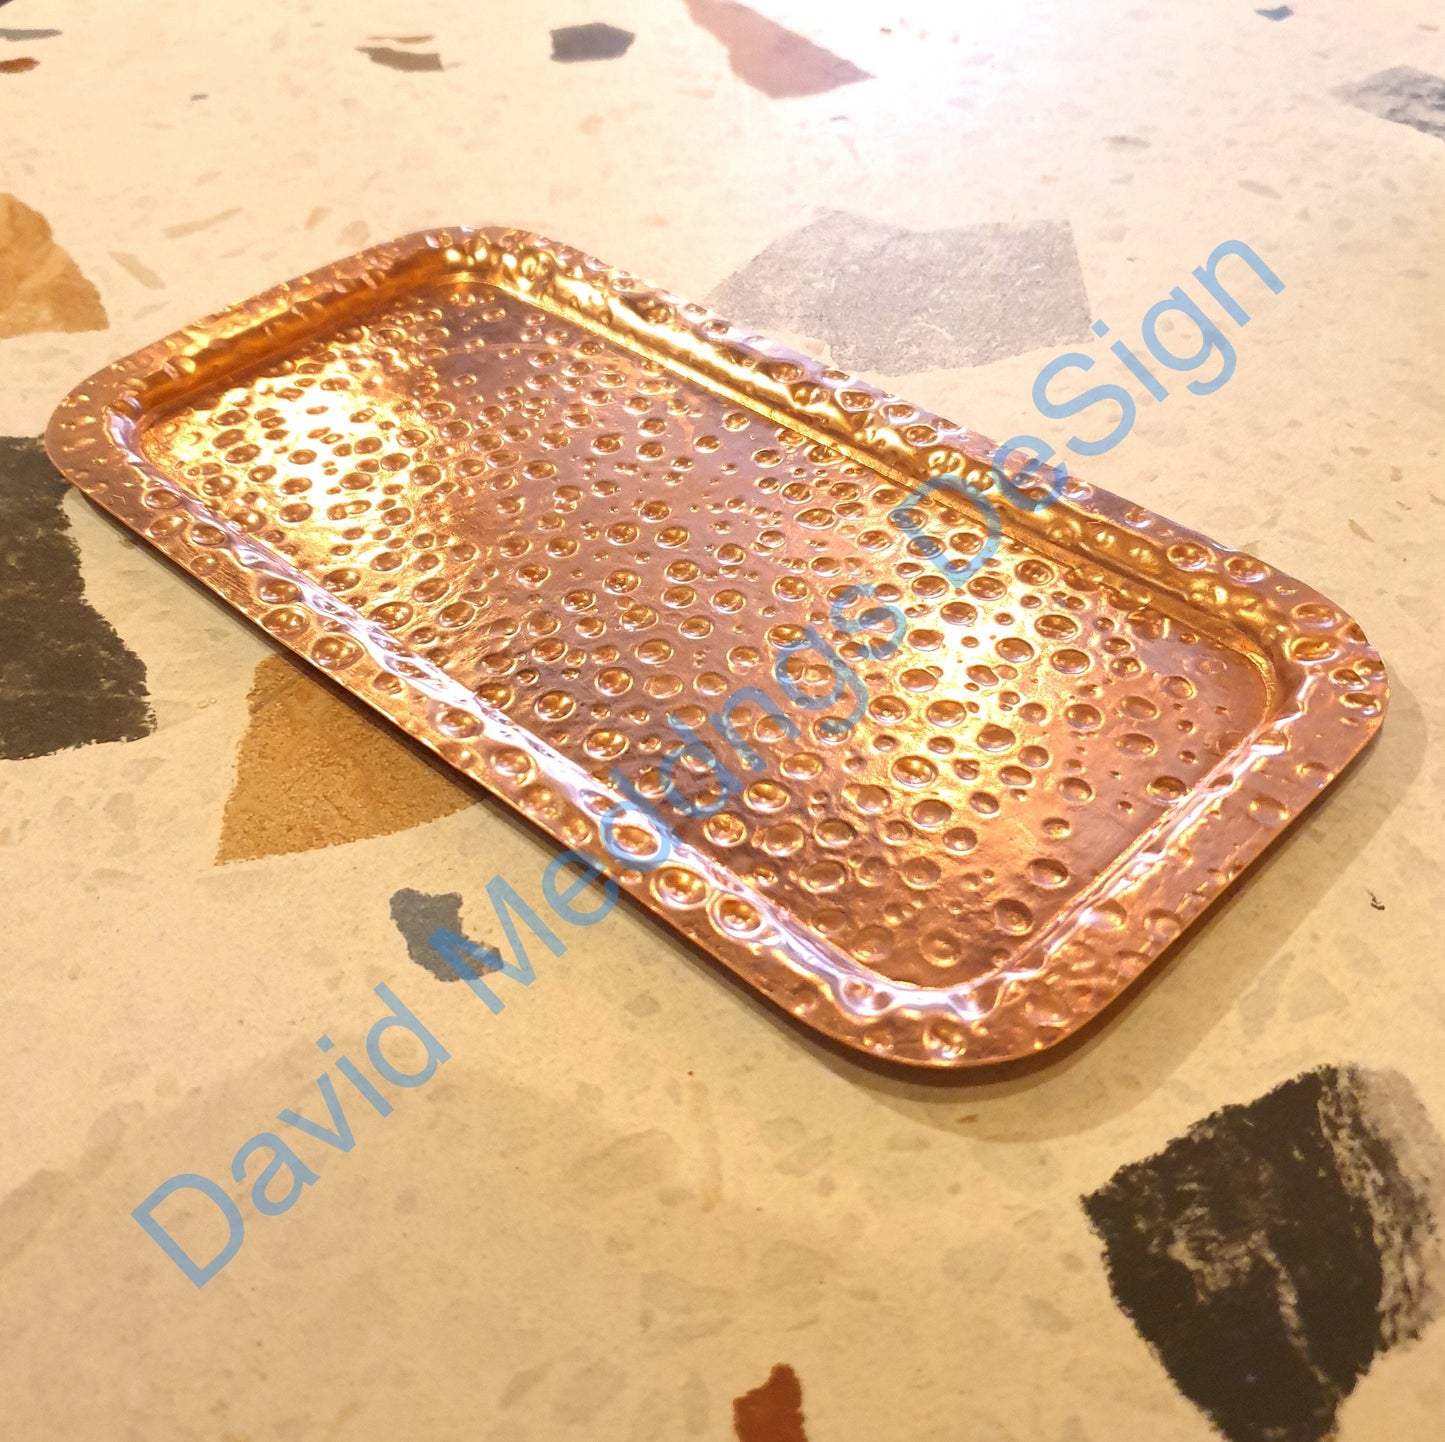 Copper coffee serving tray espresso for baristas - personalisation logos option - Hammered upcycled tx